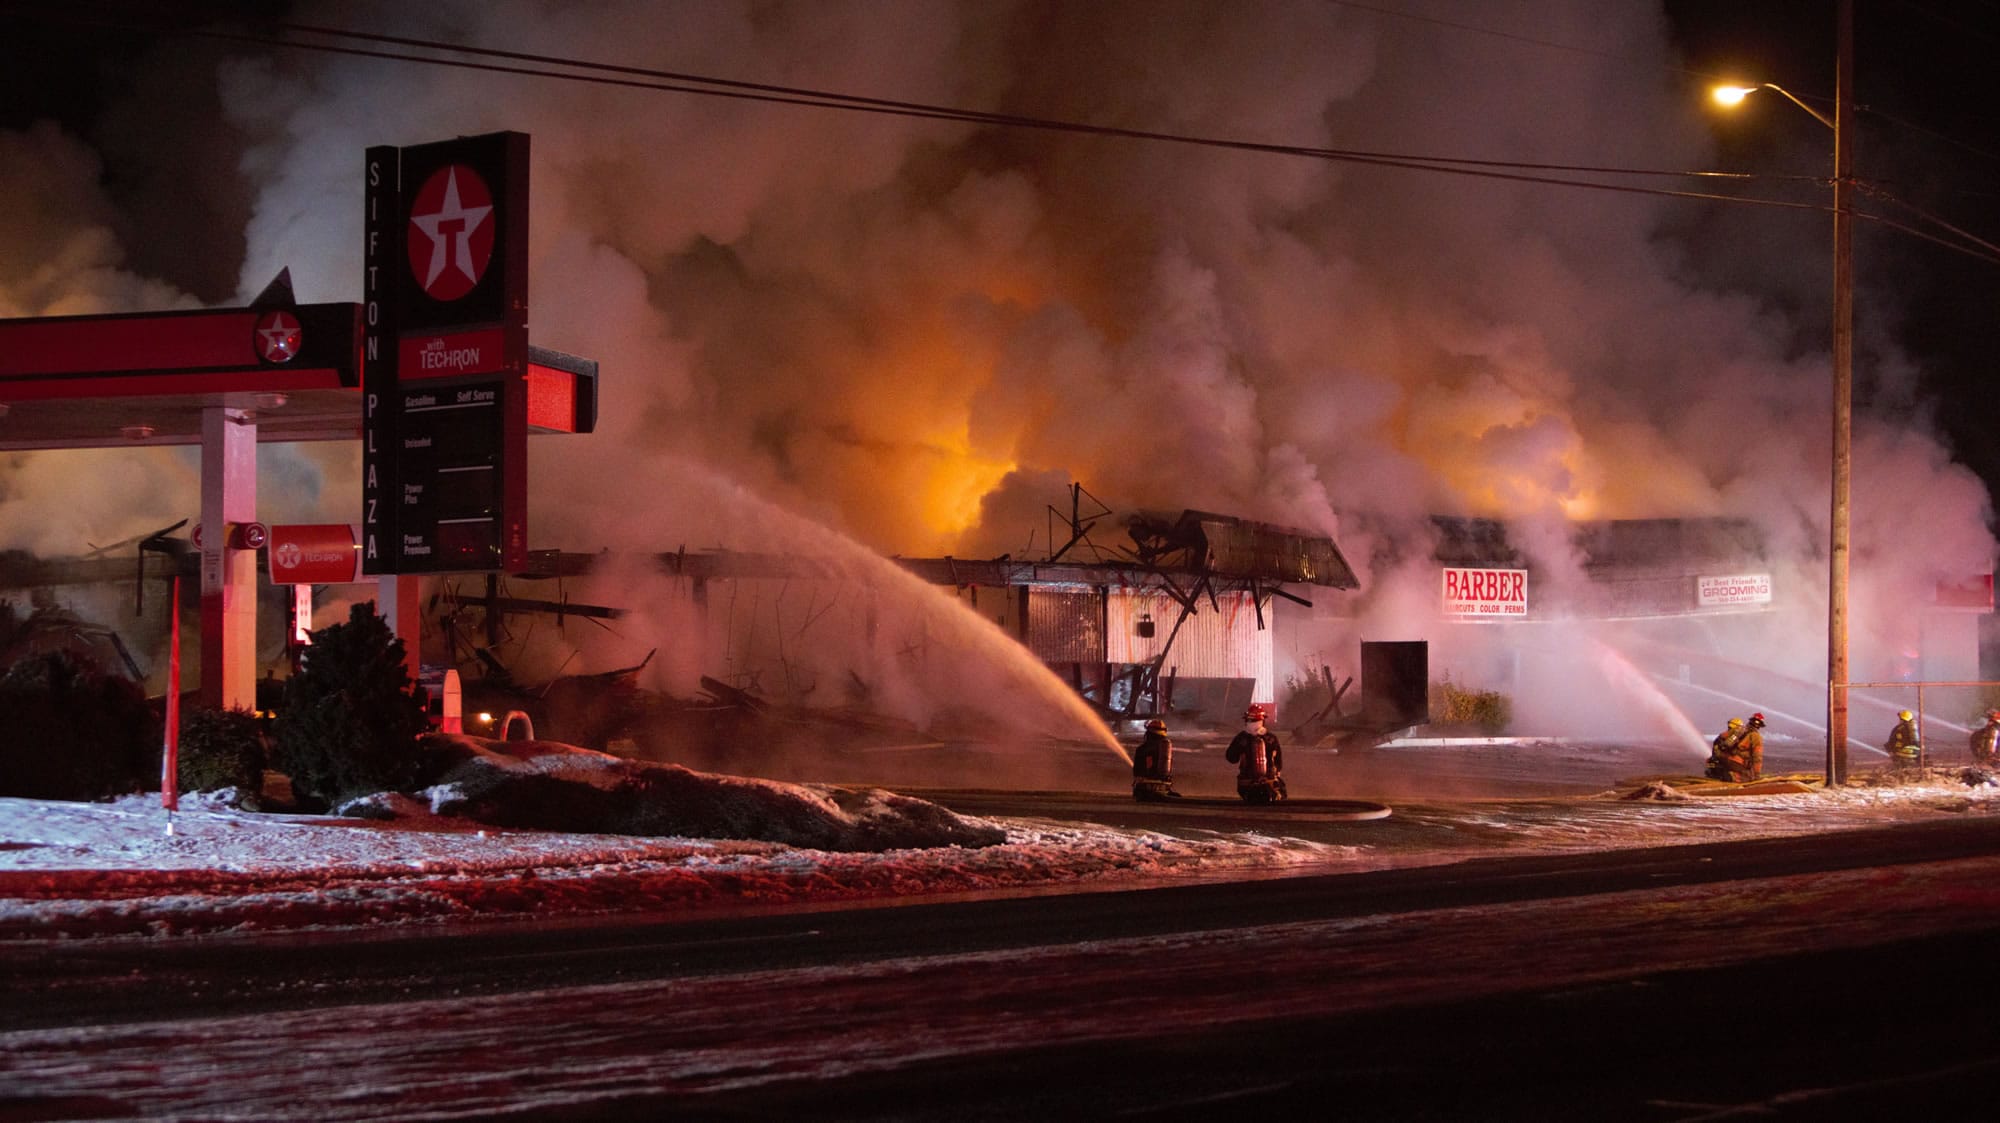 About 5:30 a.m. Sunday, a fire broke out at 13412 N.E. Fourth Plain Blvd. in Vancouver. The fire apparently started in the Oasis Market convenience store.